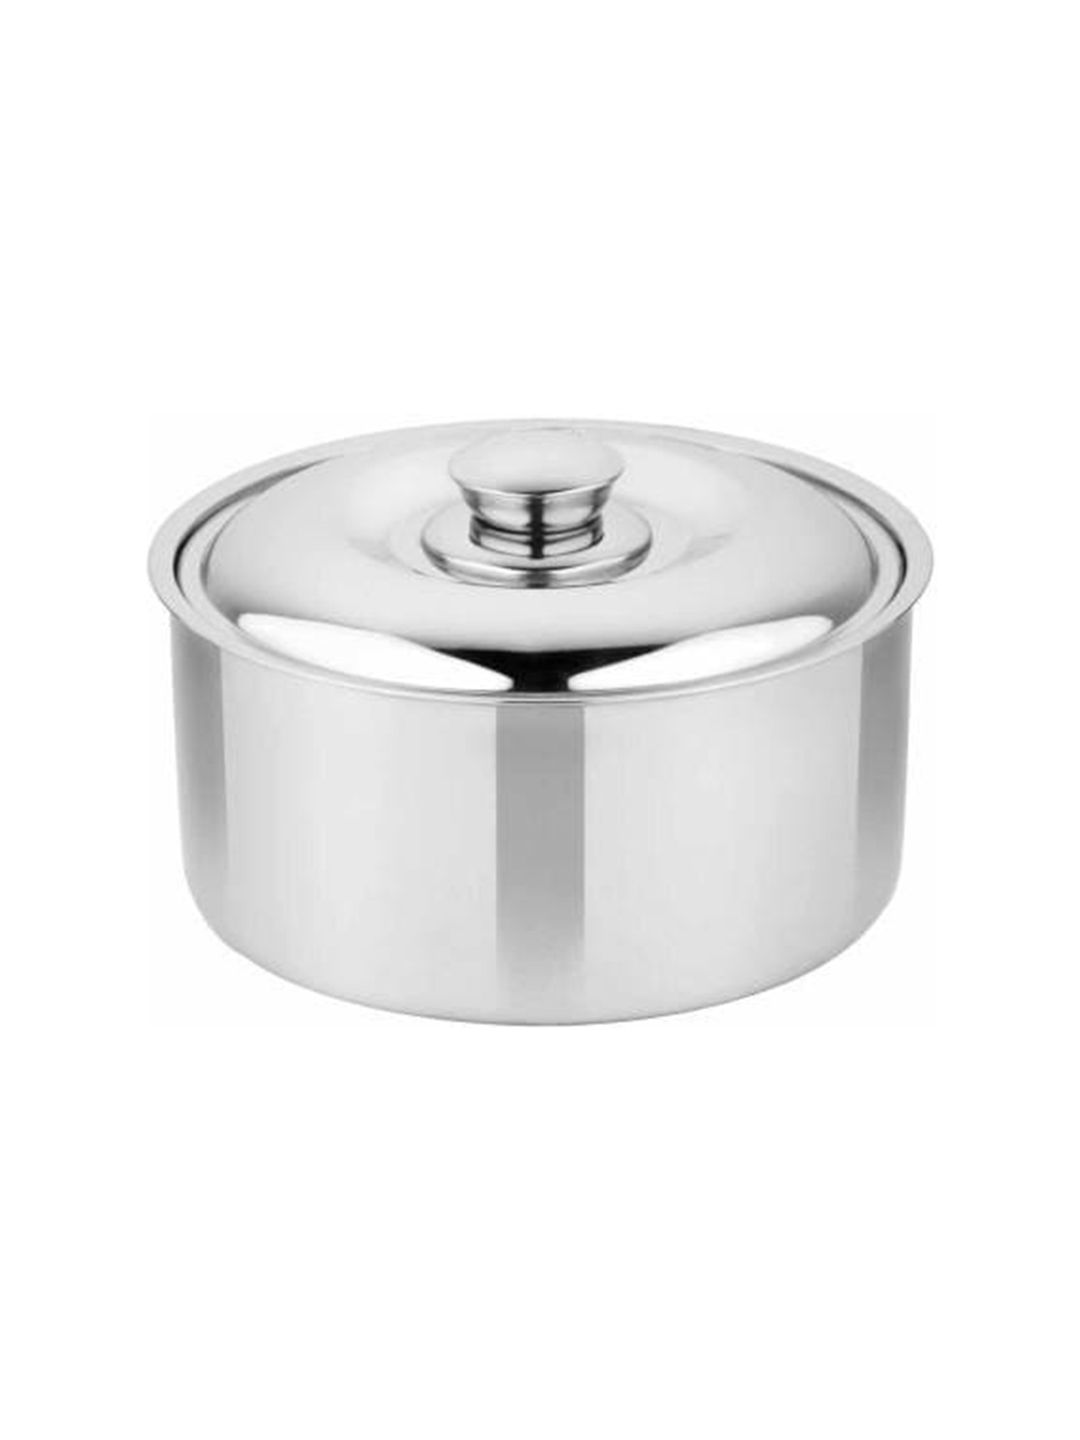 DREAM WEAVERZ Silver-Toned Solid Casserole With Lid Price in India